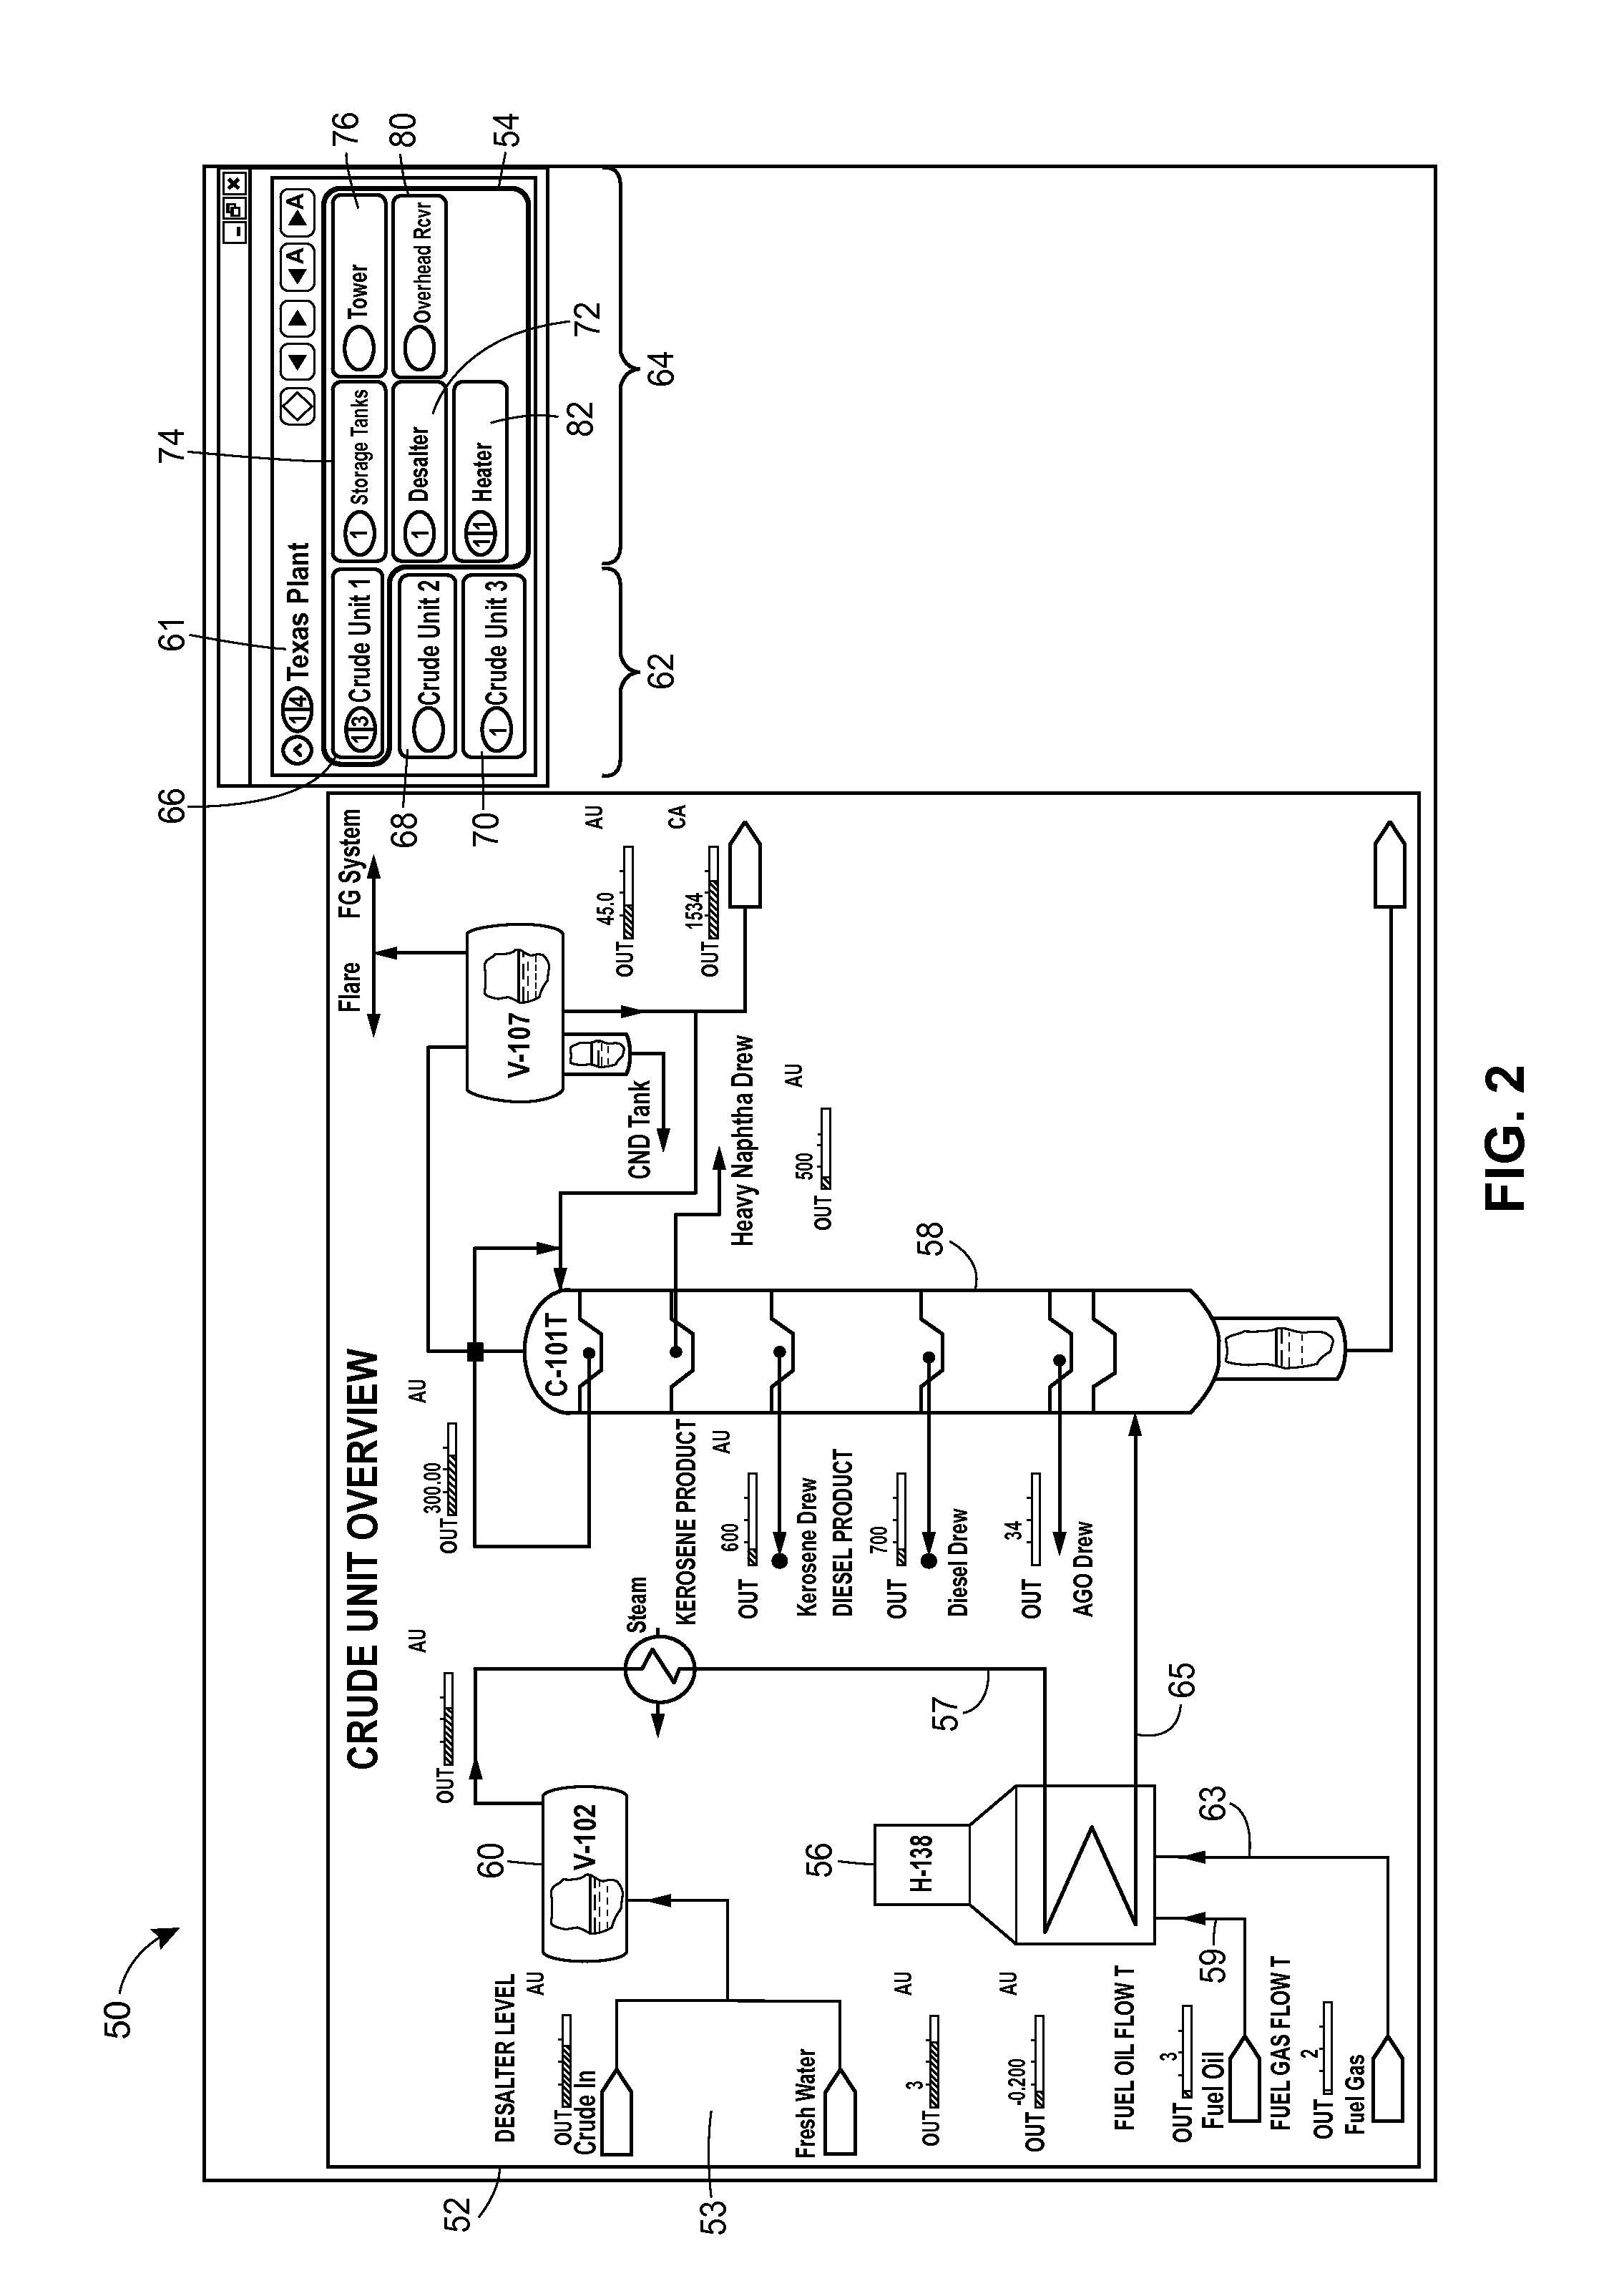 Graphical process variable trend monitoring with zoom features for use in a process control system